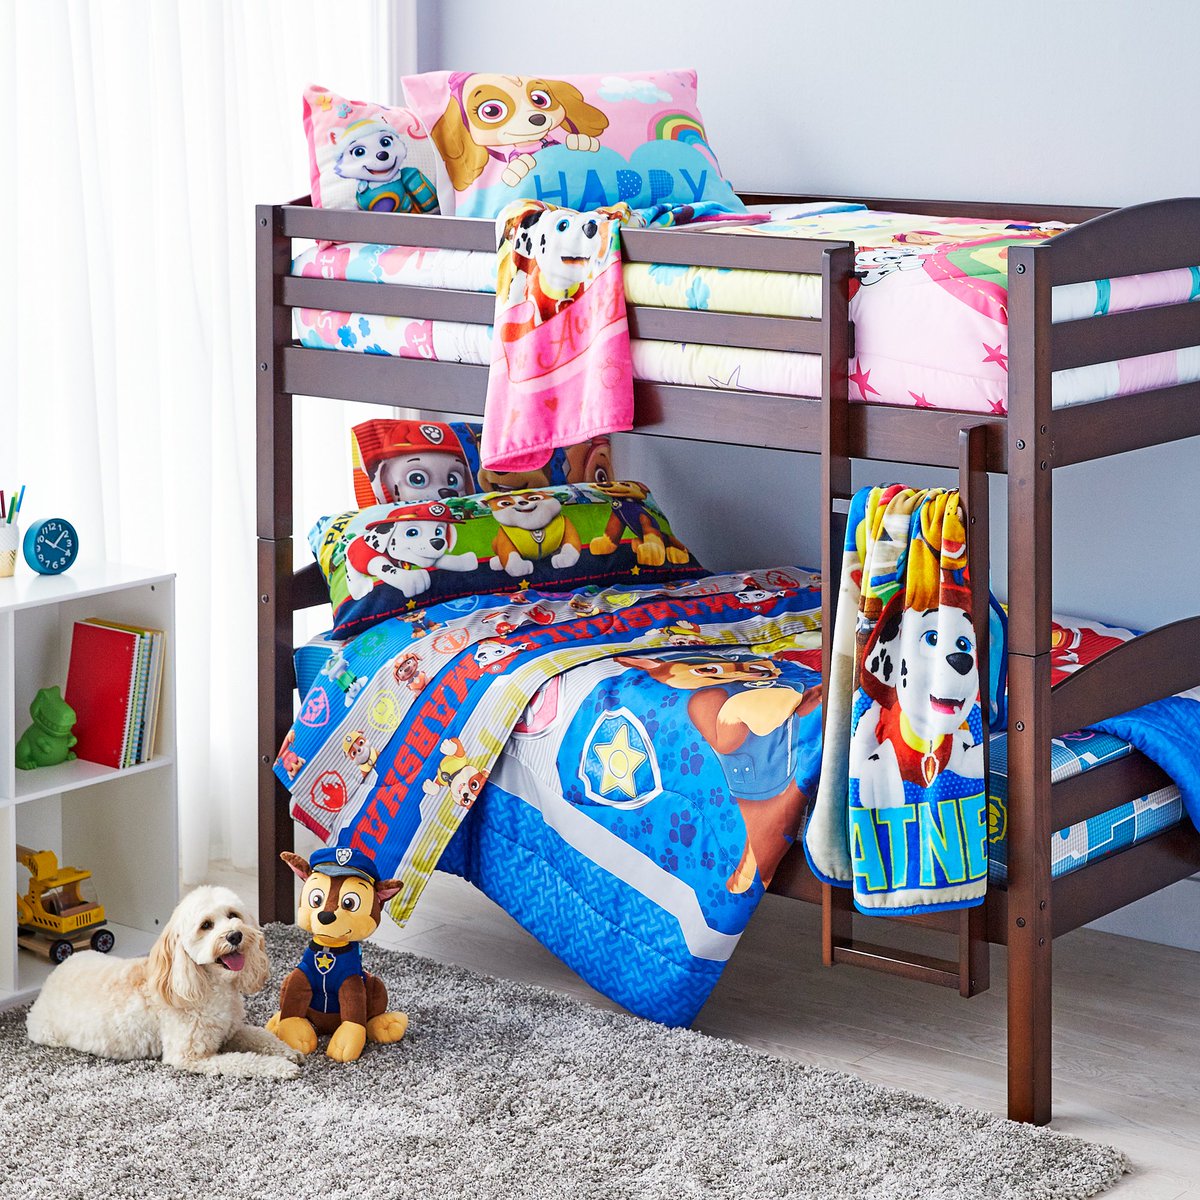 Walmart Canada On Twitter Upgrade Your Little Hero S Room With